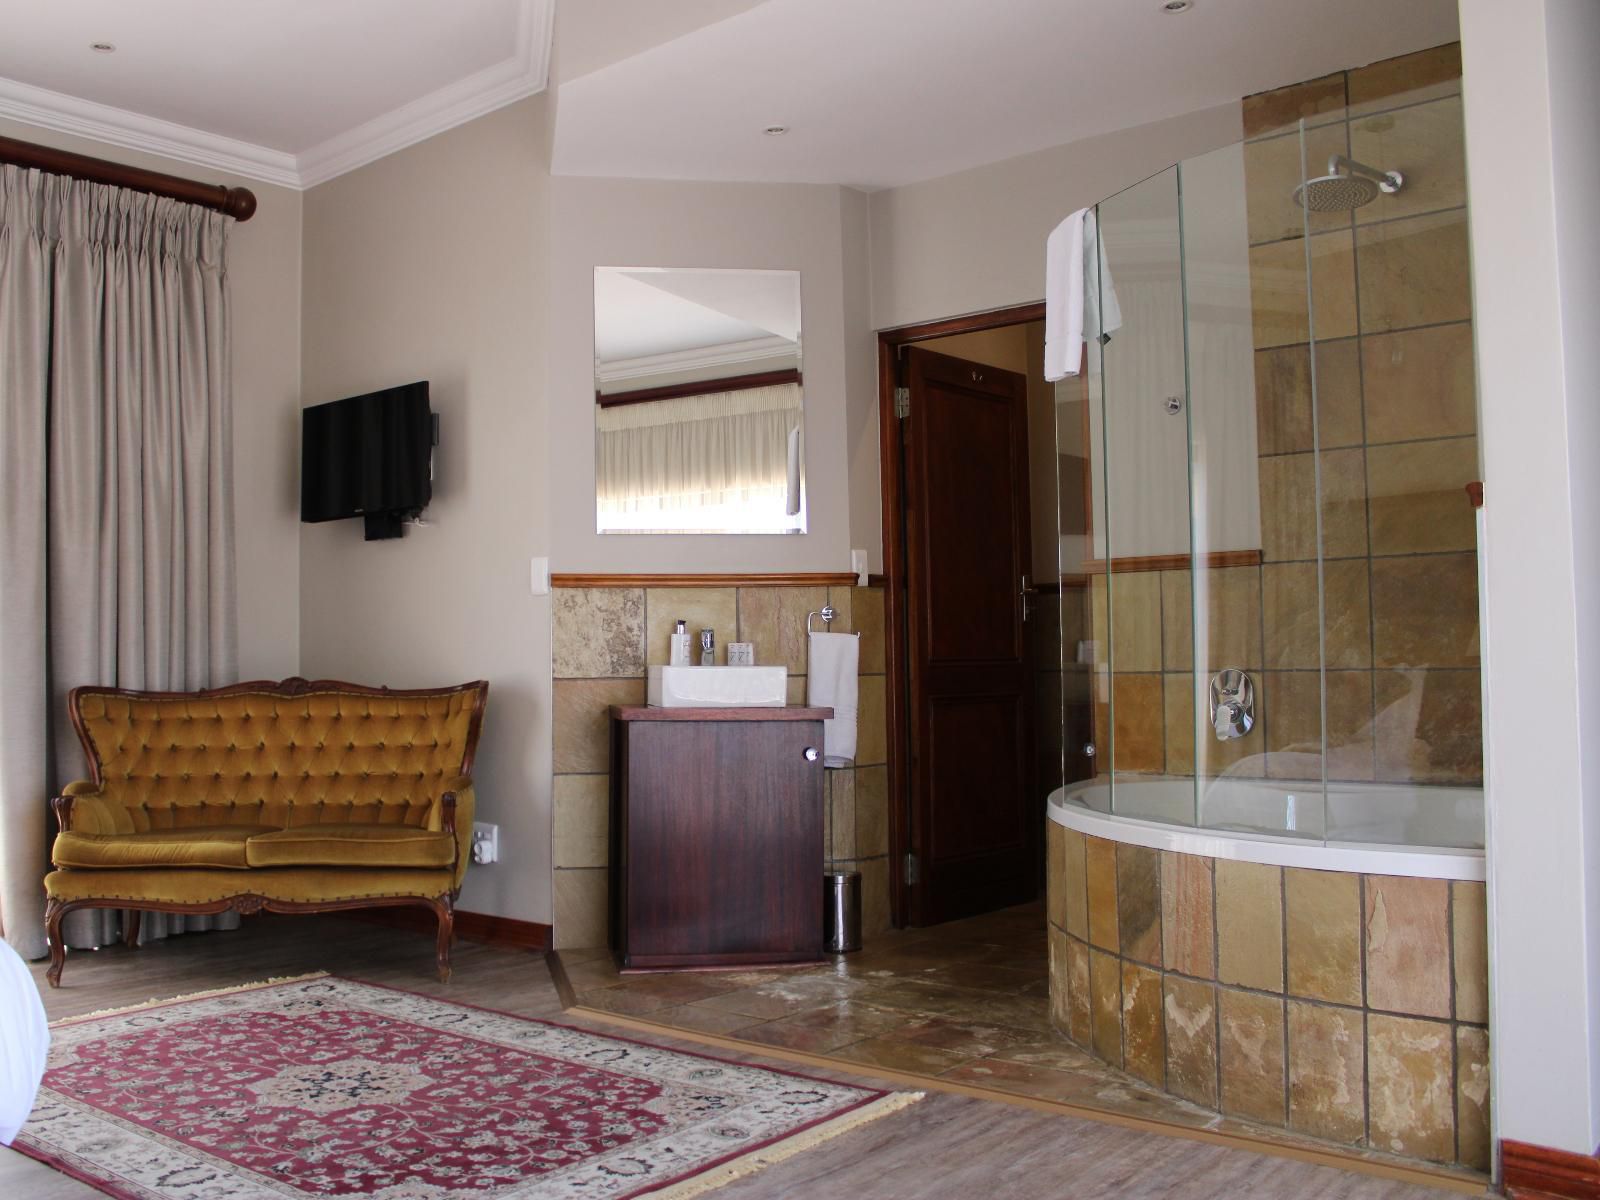 Abiento Guesthouse Park West Bloemfontein Free State South Africa 